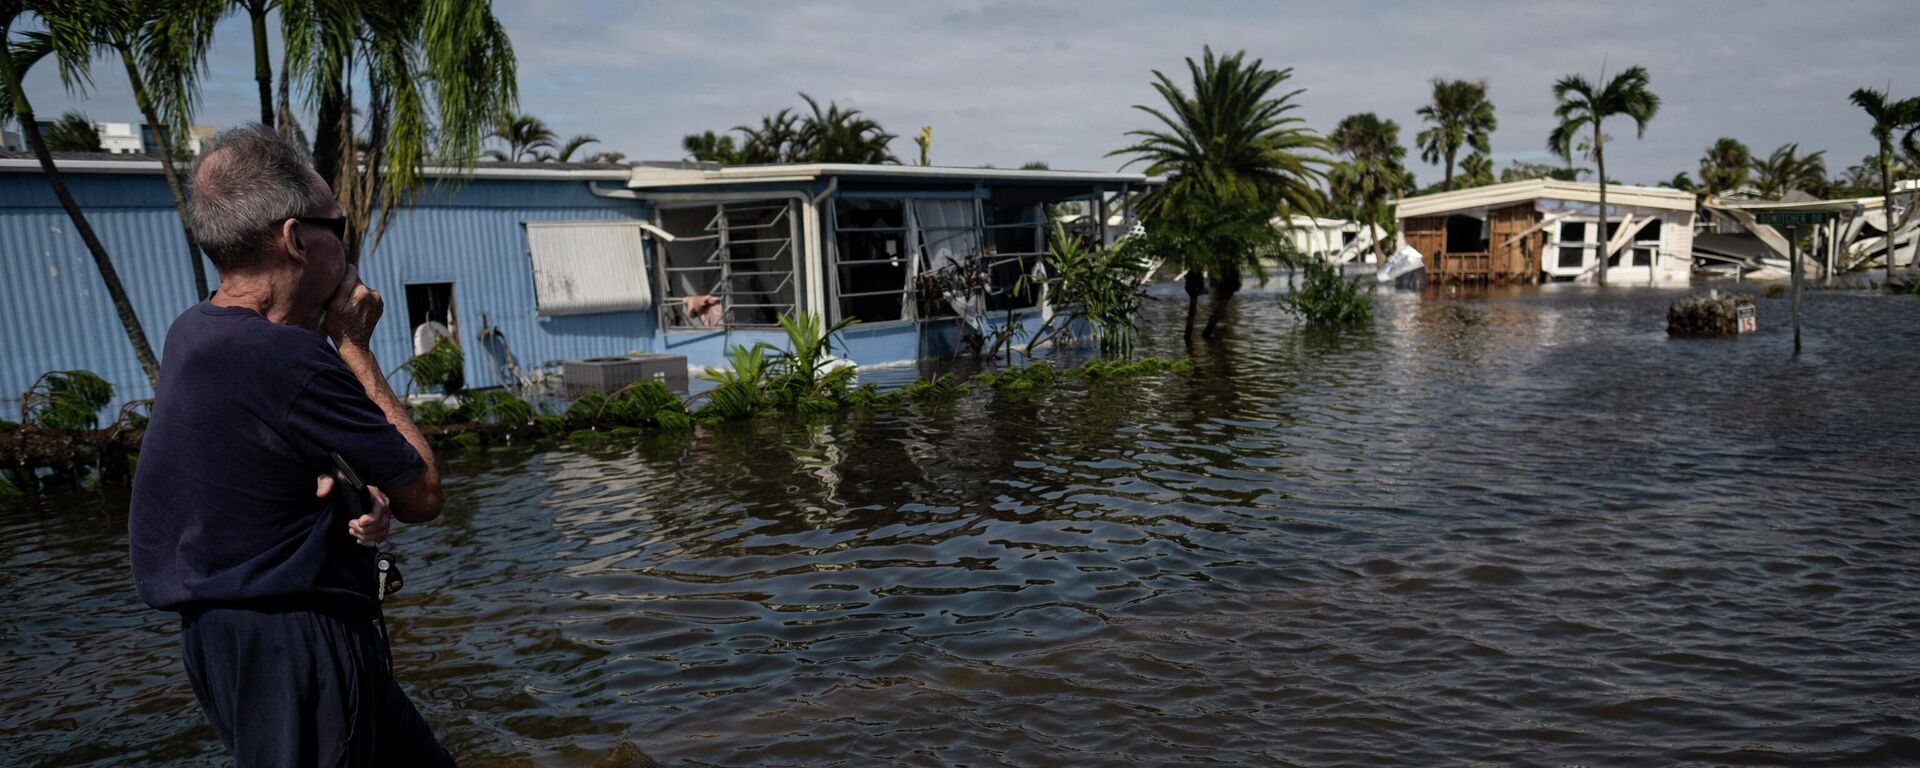 A man looks on from the a flooded street of a neighborhood in Fort Myers, Florida on September 29, 2022. - Hurricane Ian left much of coastal southwest Florida in darkness early on Thursday, bringing catastrophic flooding that left officials readying a huge emergency response to a storm of rare intensity. - Sputnik International, 1920, 03.10.2022